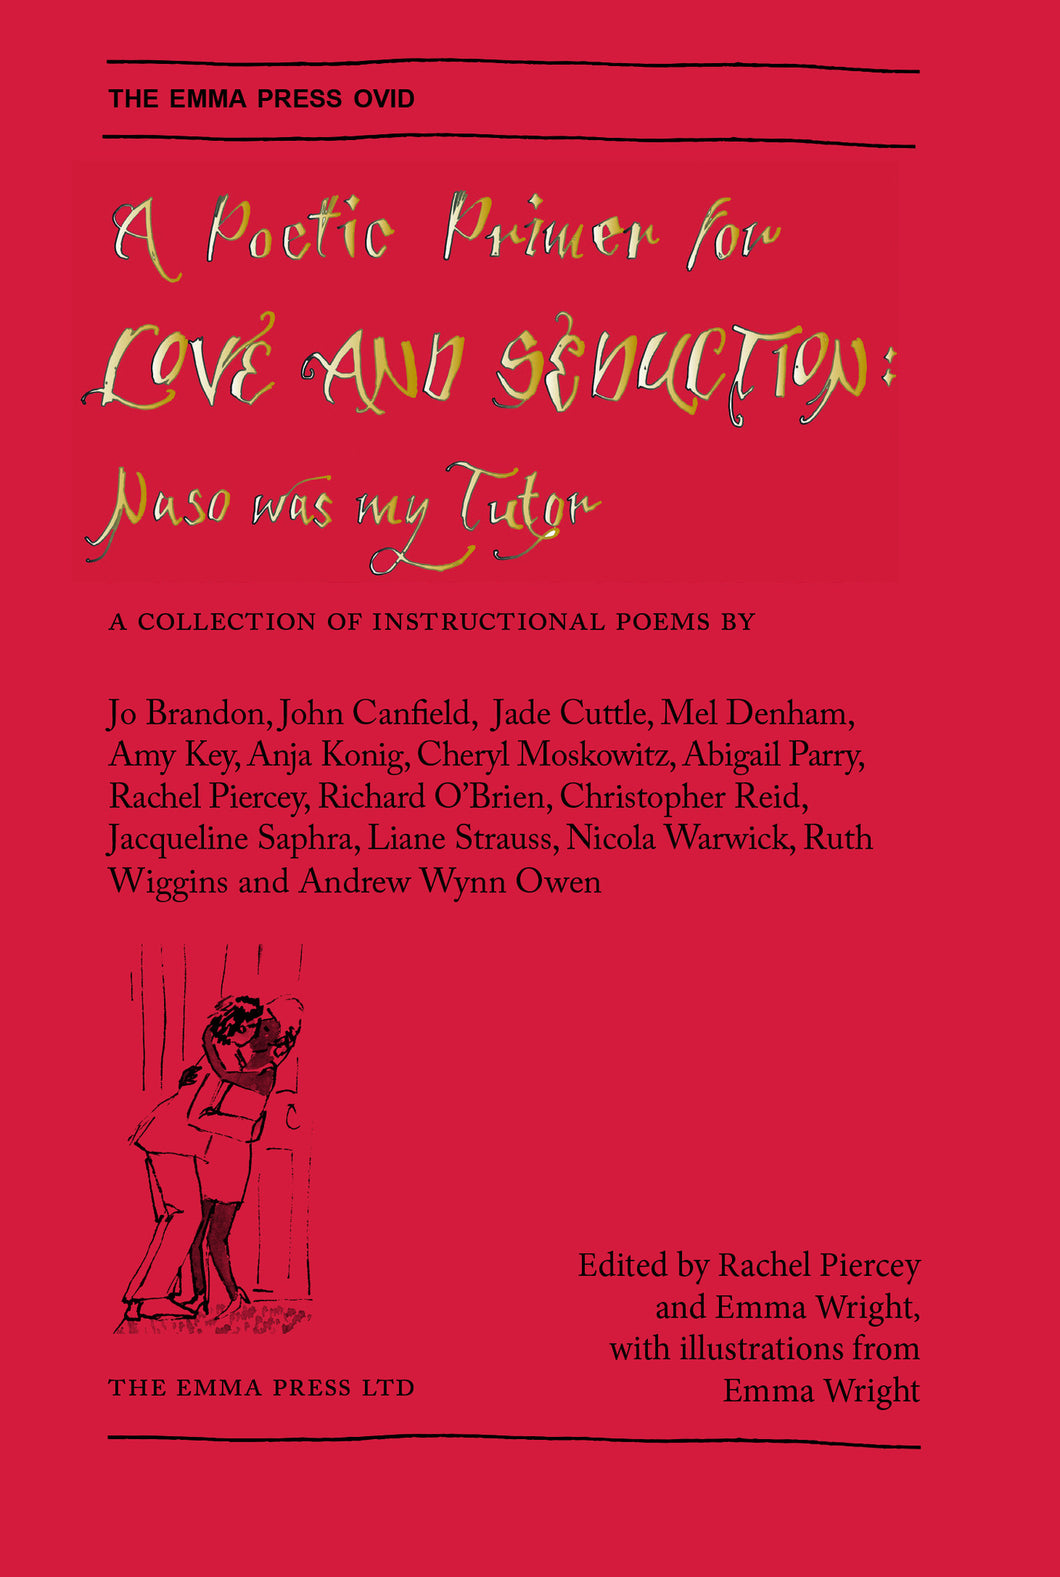 A Poetic Primer of Love and Seduction